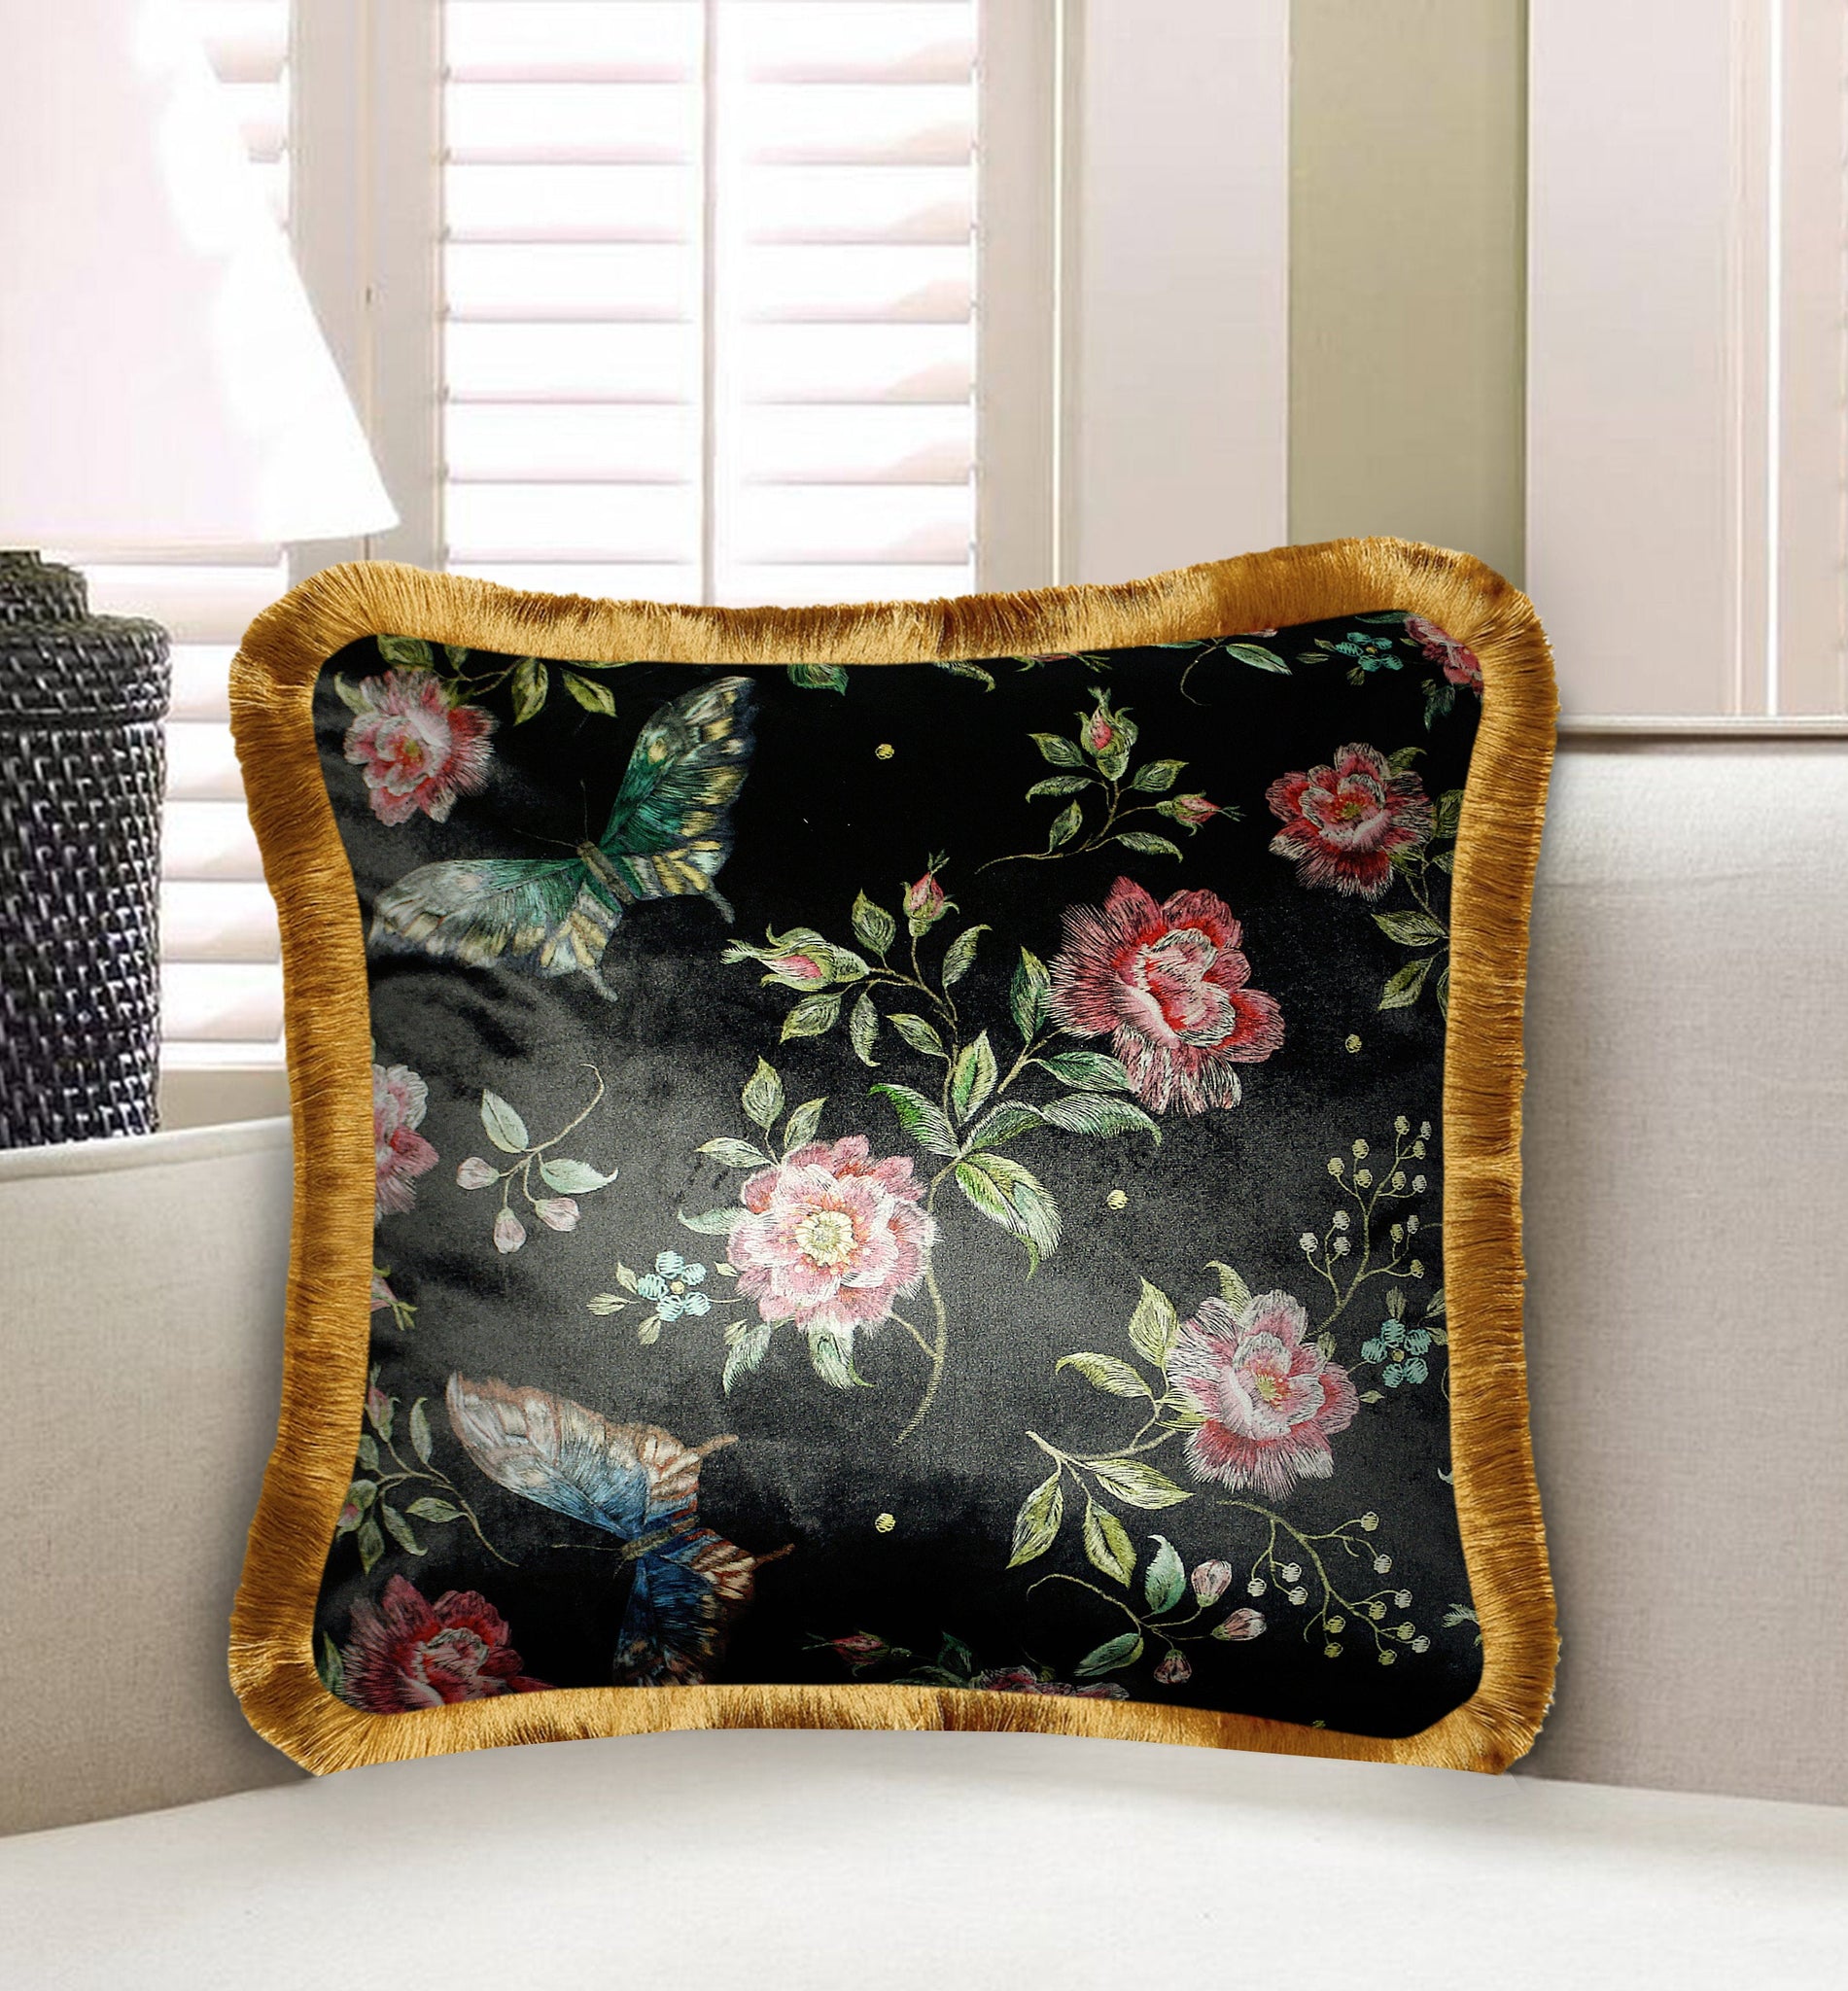  Velvet Cushion Cover Classic Rose Bouquet Decorative pillowcase Butterfly and Flower Décor Throw Pillow for Sofa Chair Bedroom Living Room Multi Color 45x45cm (18x18 Inches)